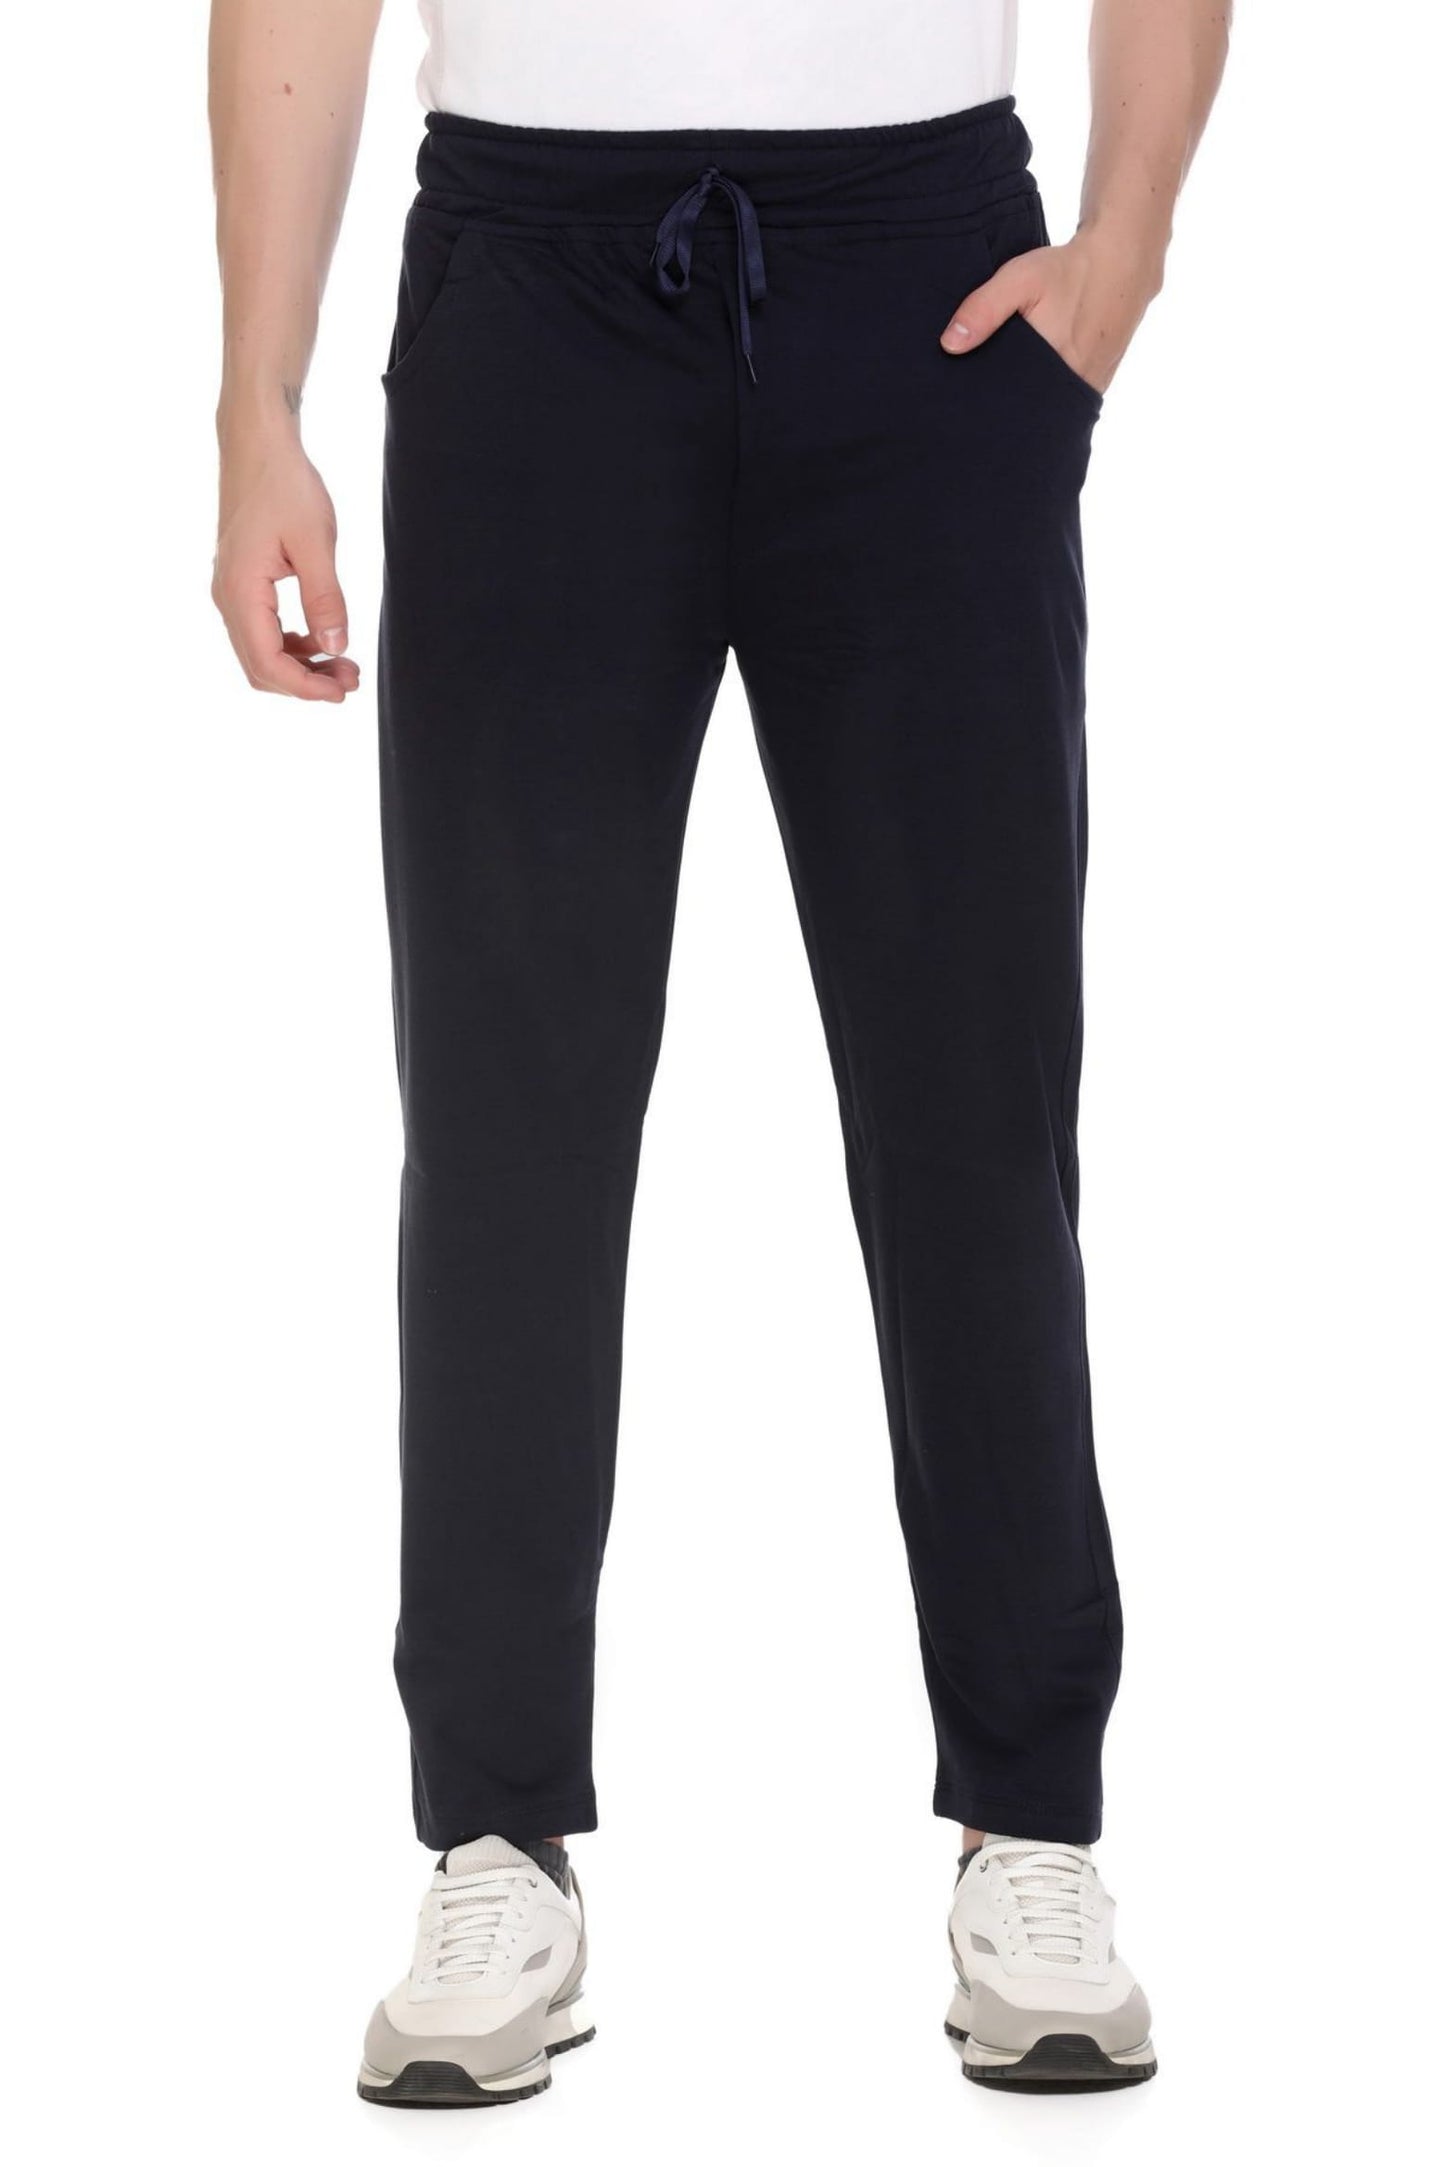 Comfy Navy Blue Cotton Jinxer Regular Fit Sports Lowers For Men At Best Prices Online In India